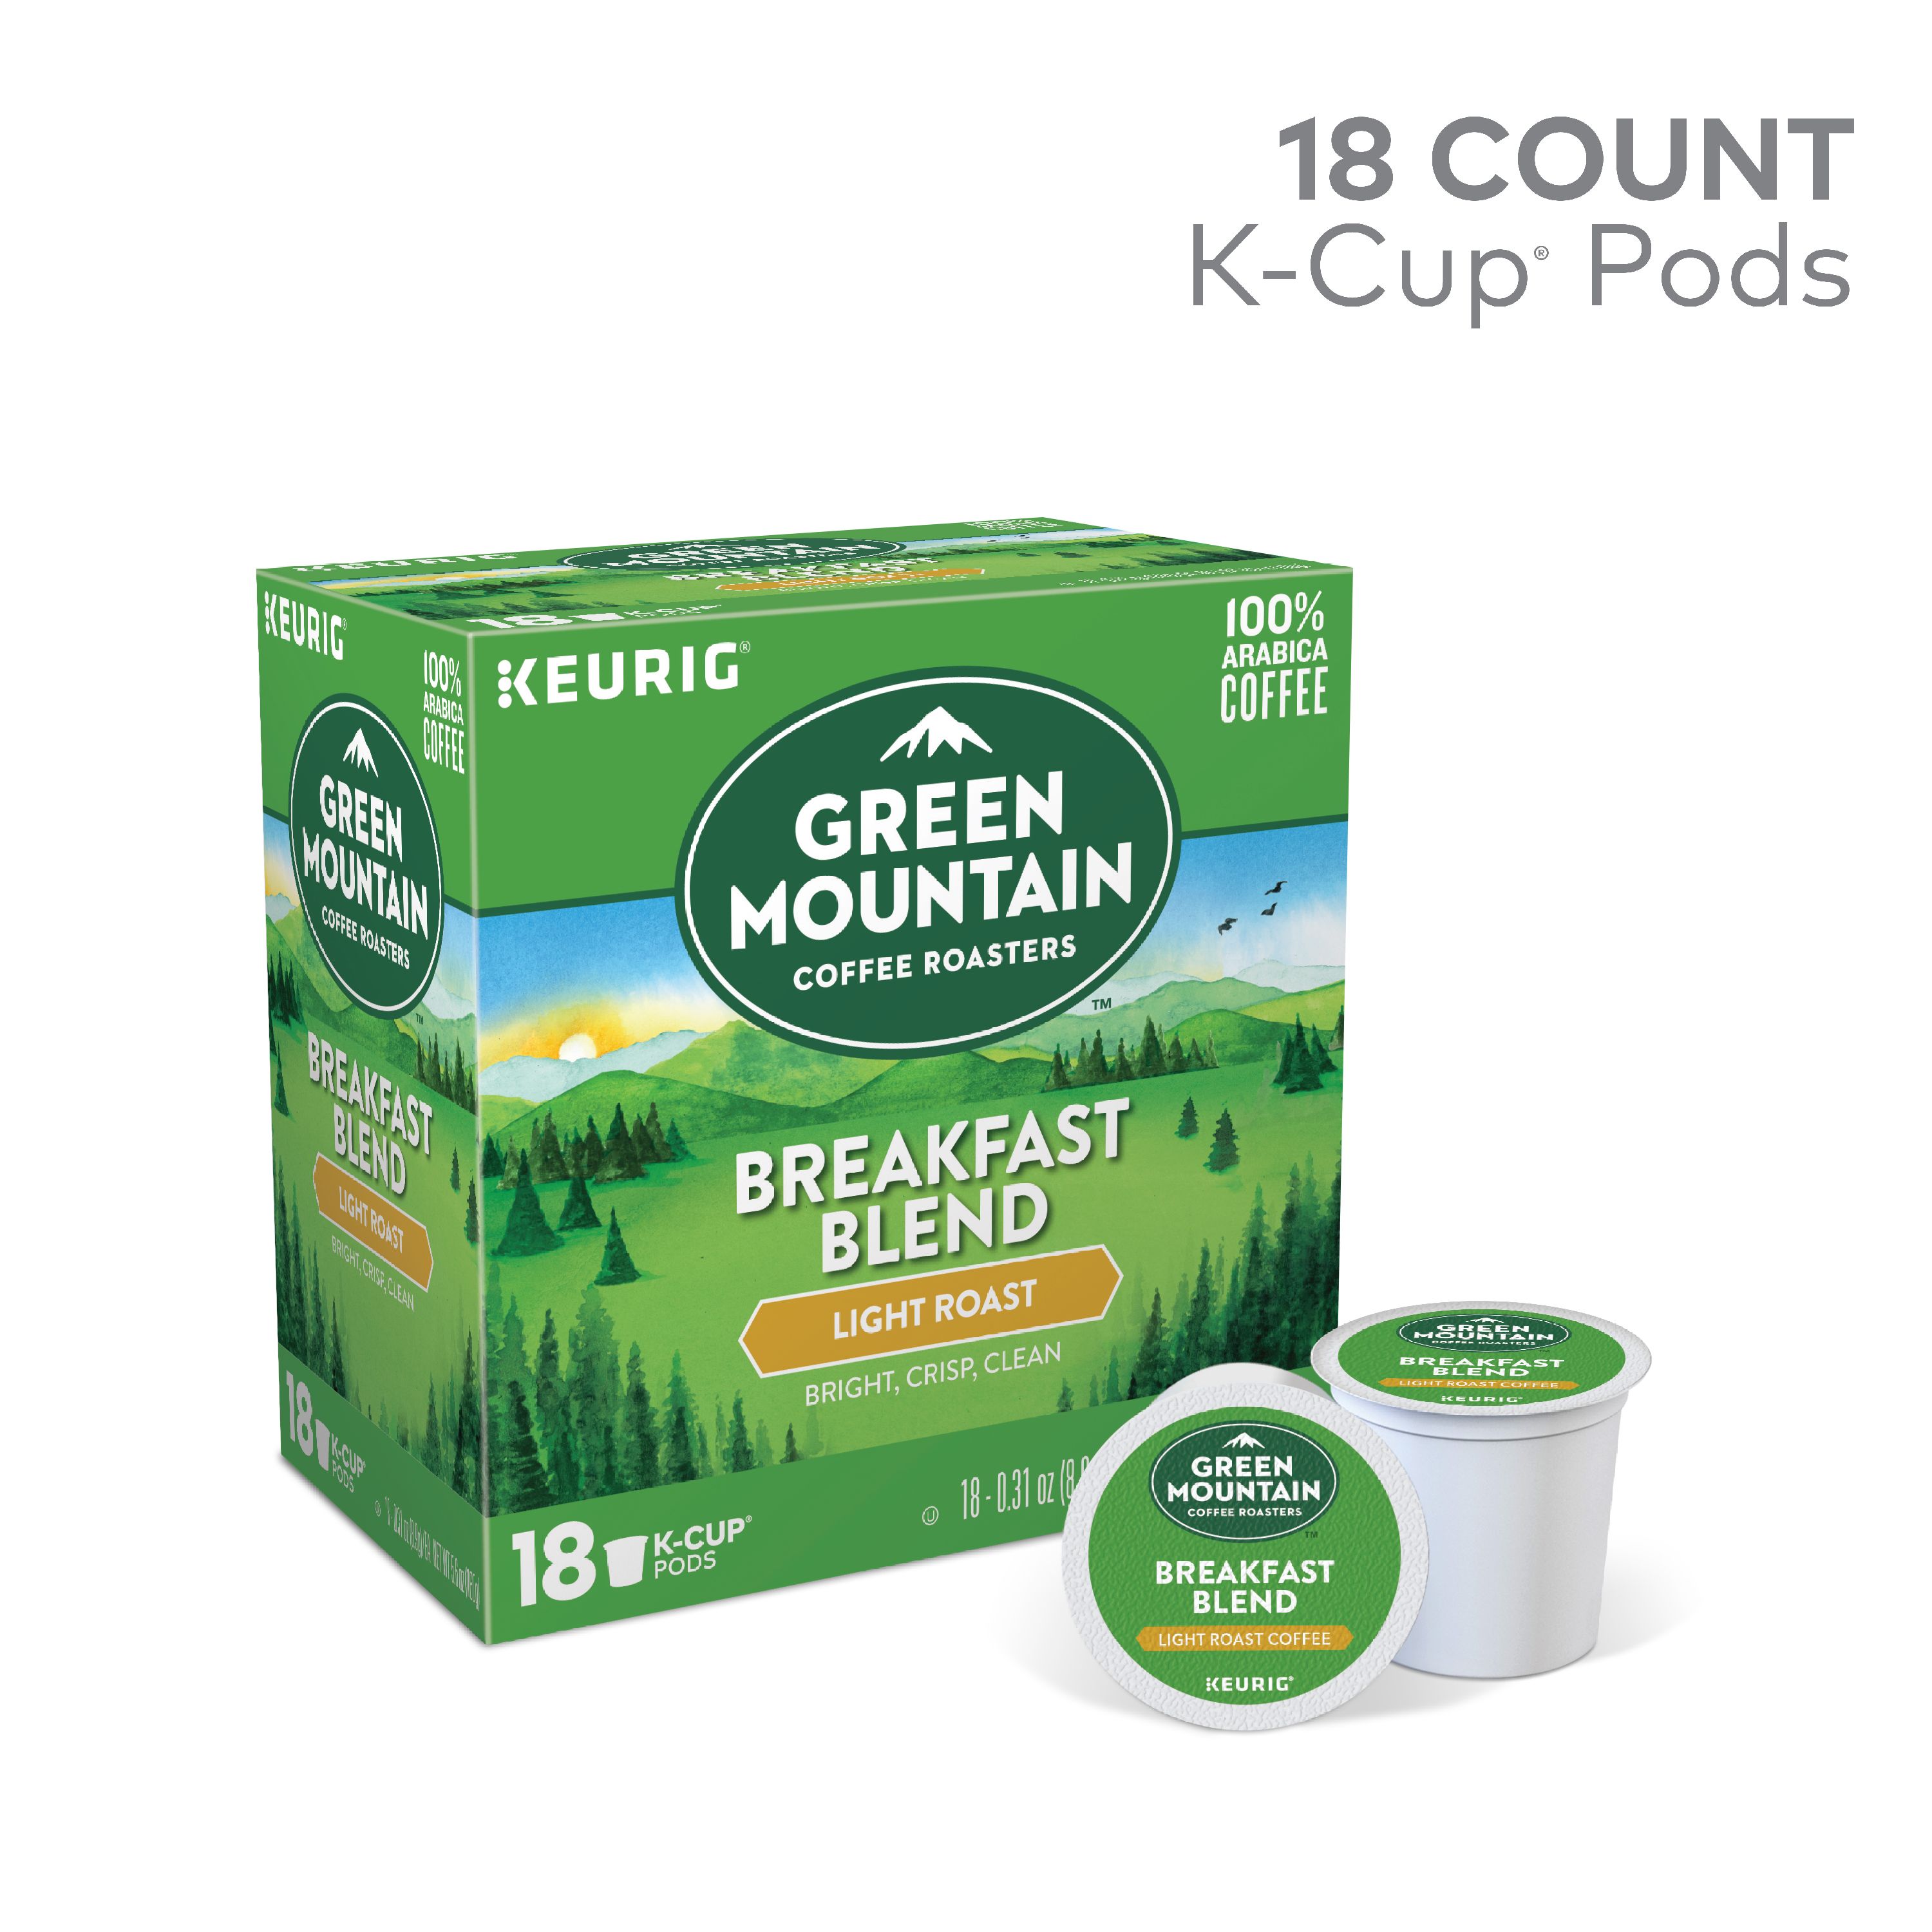 Green Mountain Coffee Breakfast Blend K-Cup Pods, Light Roast, 18 Count for Keurig Brewers - image 1 of 9